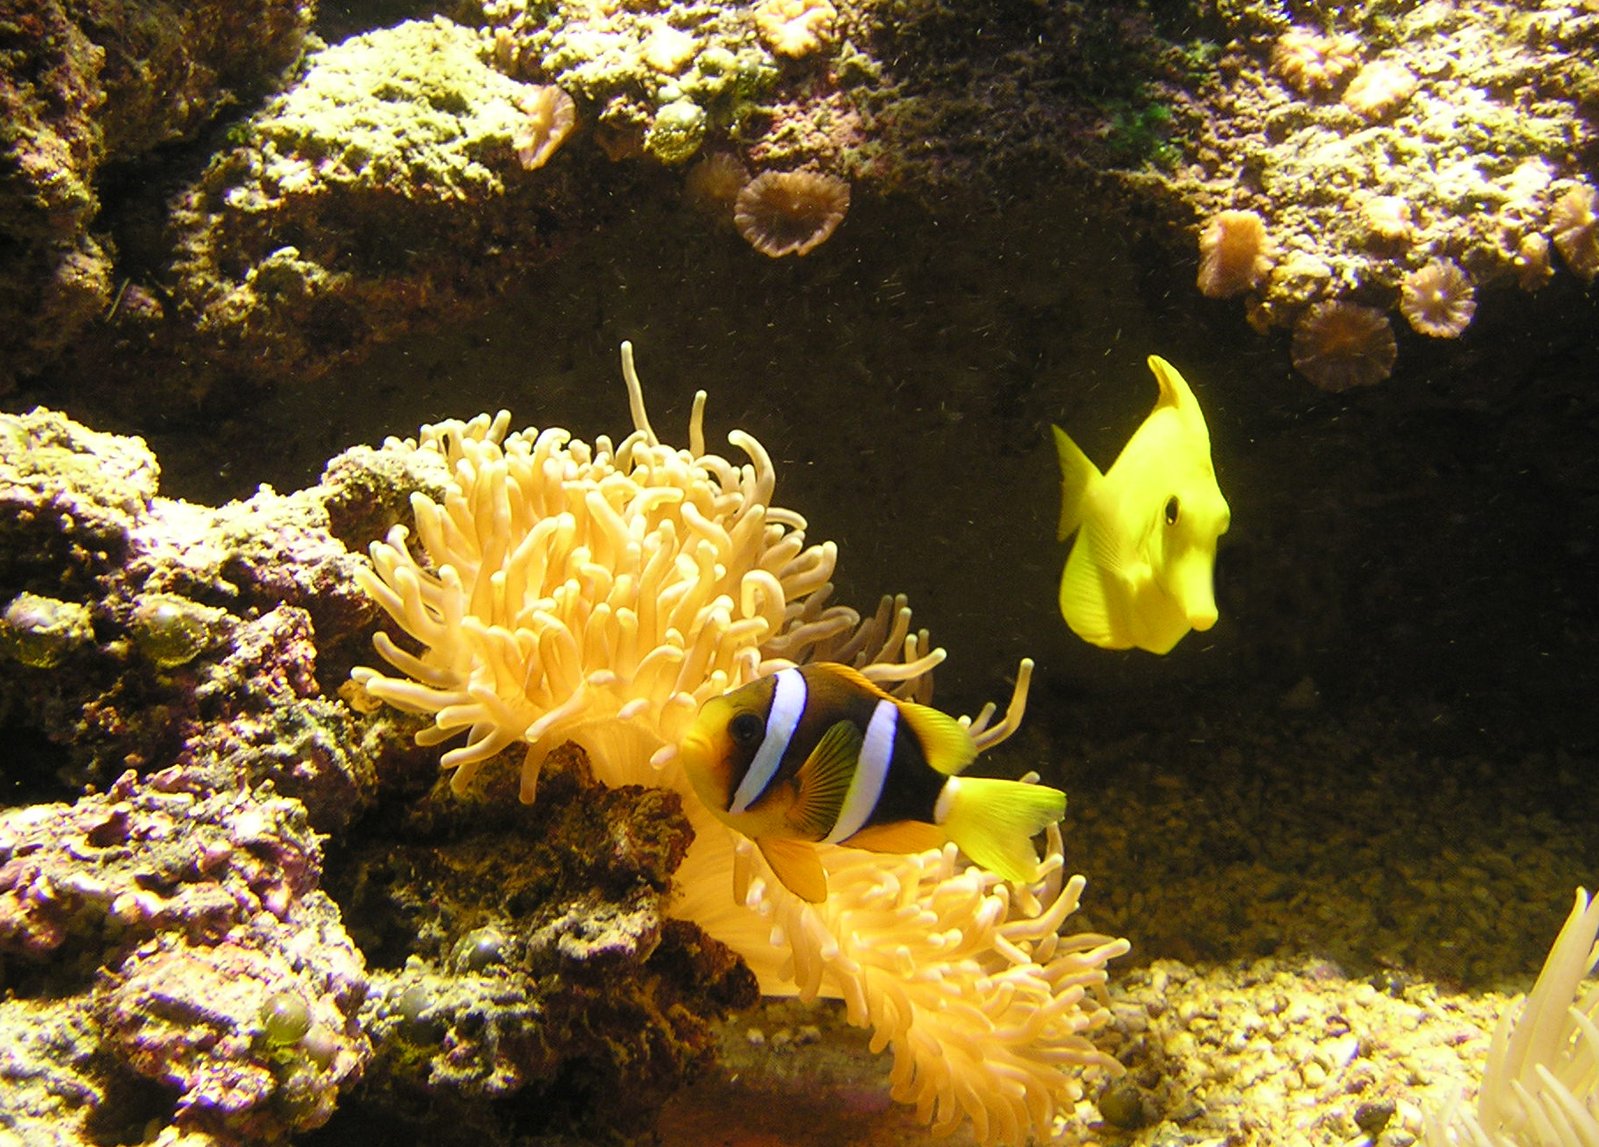 the two colorful marine animals are in their home